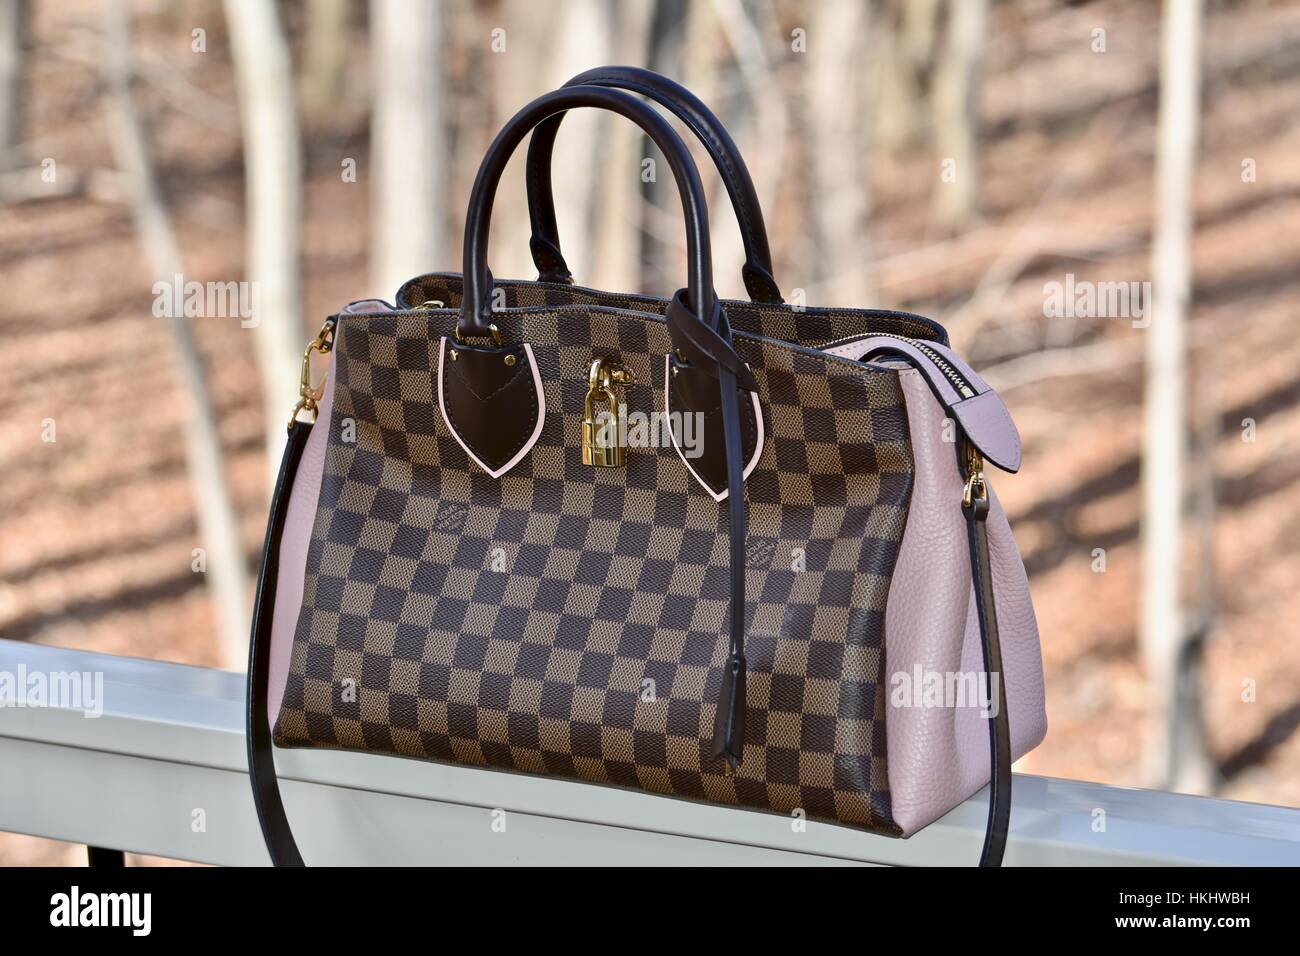 Louis Vuitton handbag overlooking a wooded forest Stock Photo